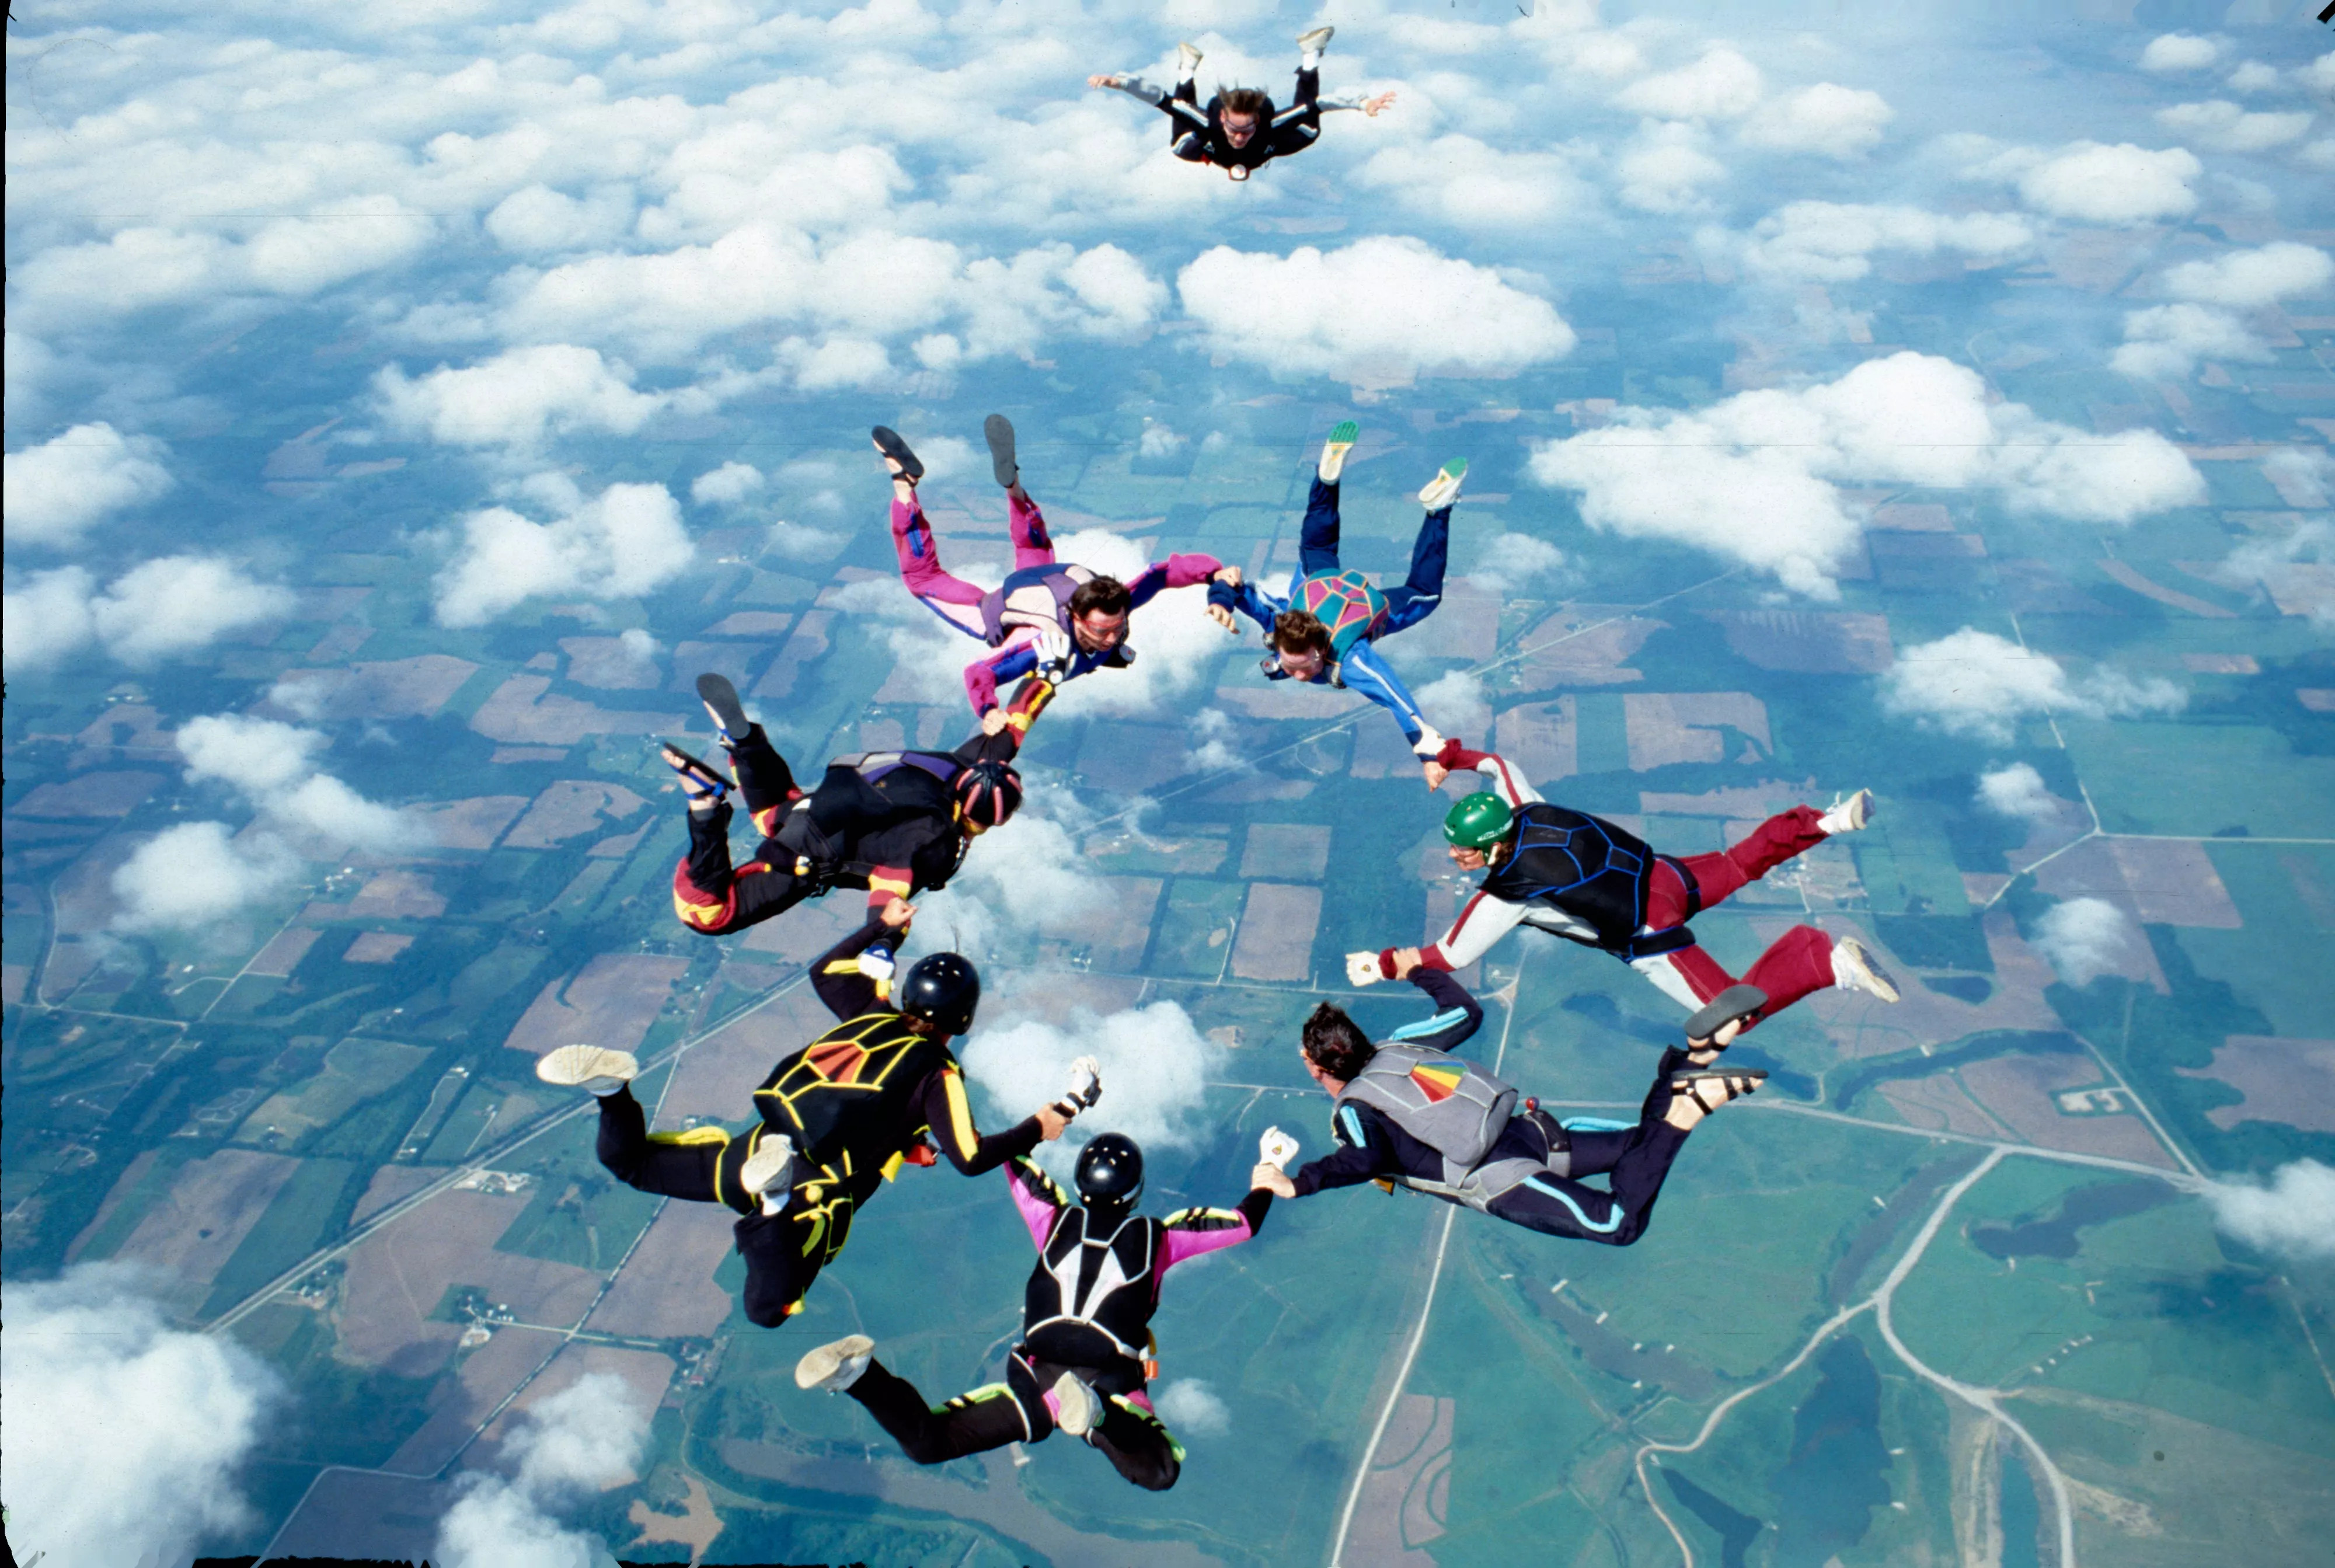 Skydive Switzerland Dropzone in Switzerland, Europe | Skydiving - Rated 1.1